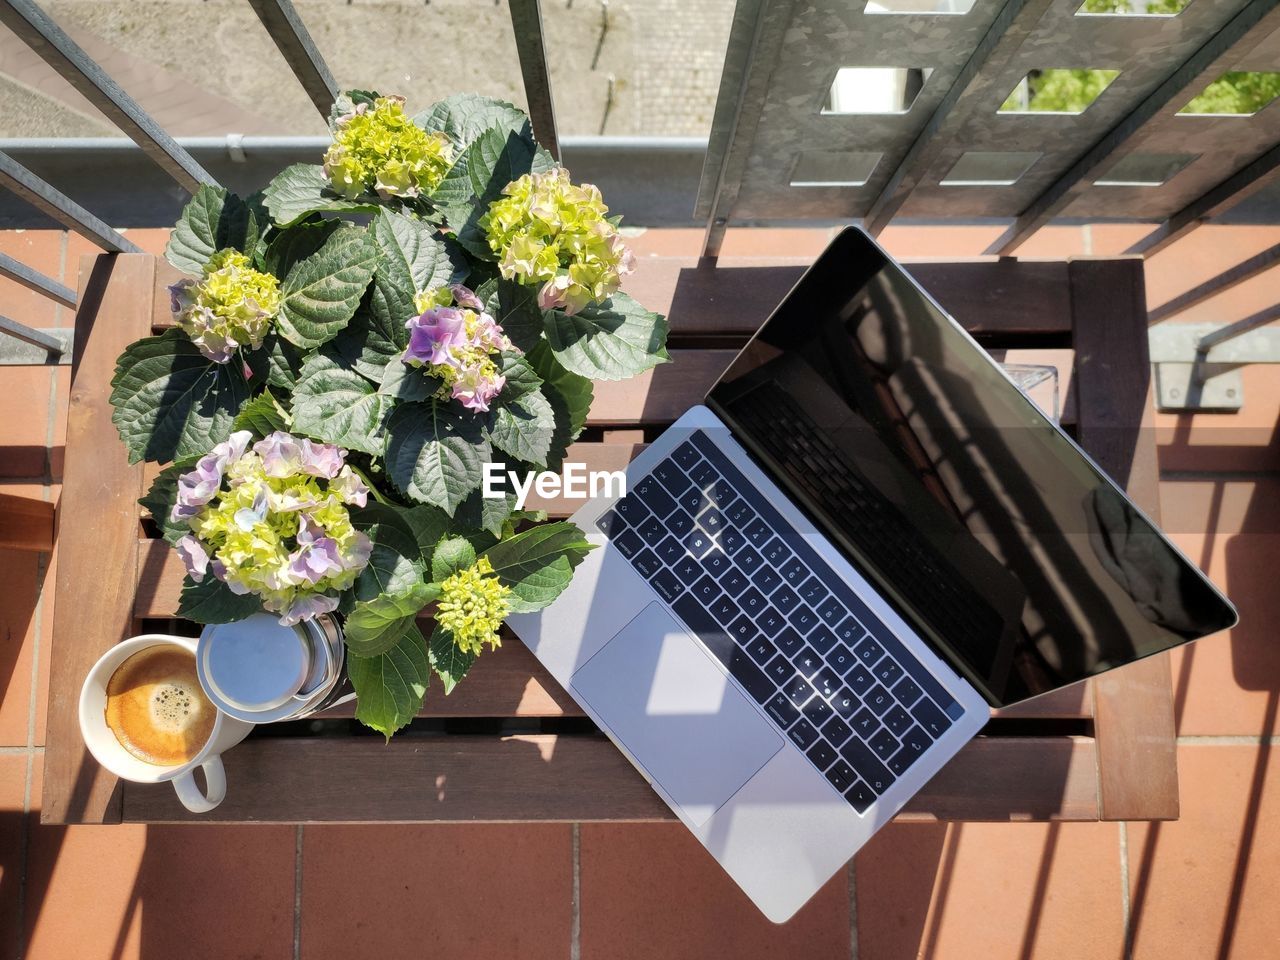 High angle view of flower and laptop on balcony table